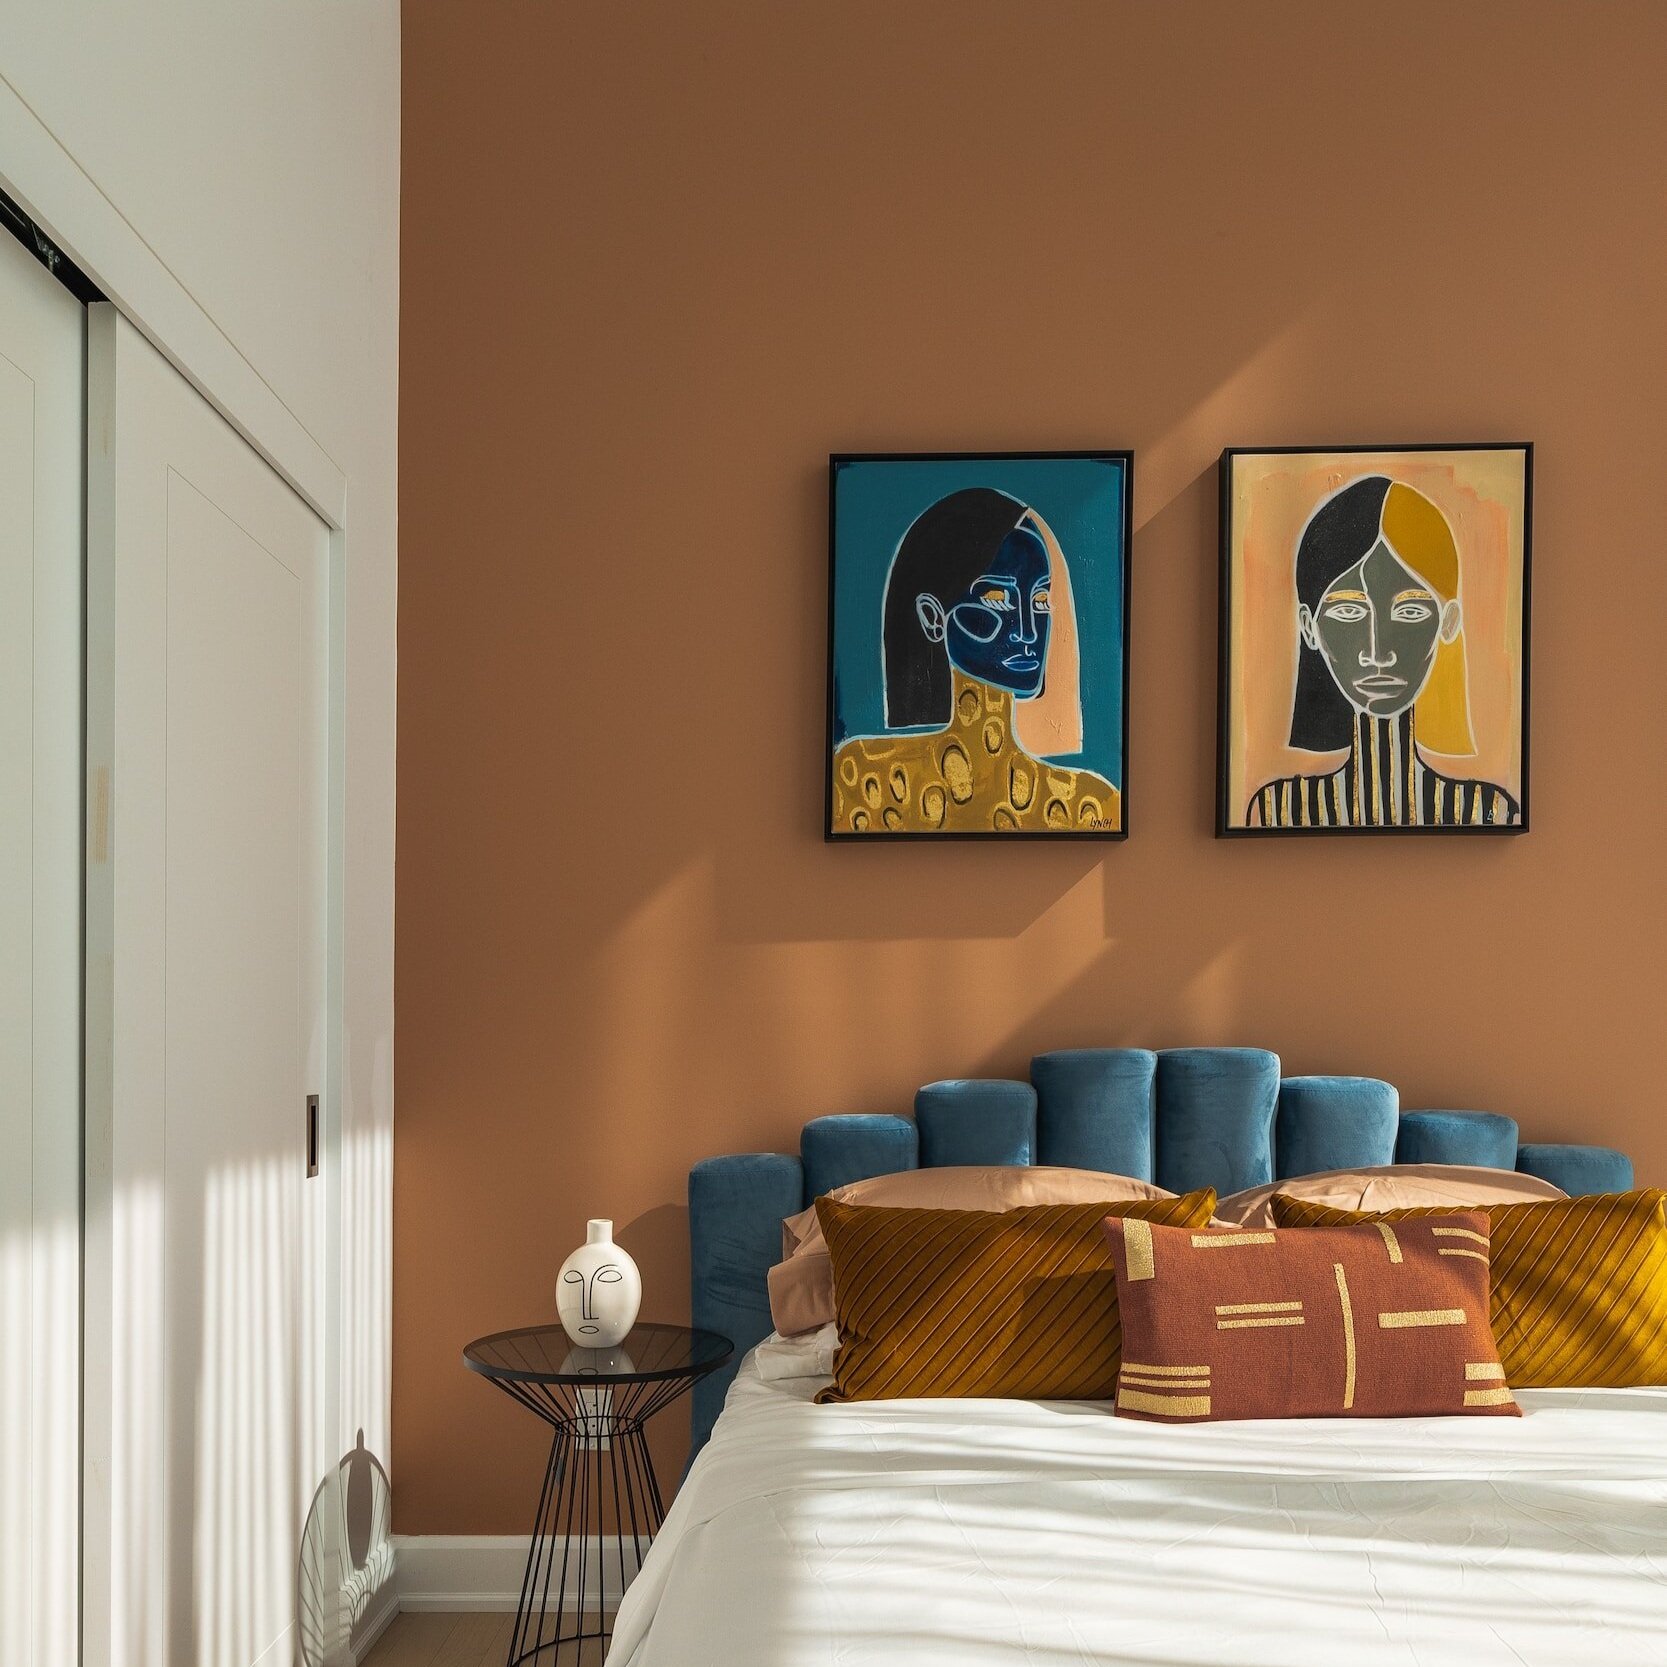 From mystic mauve to earthy terracotta: the hottest color trends for your bedroom